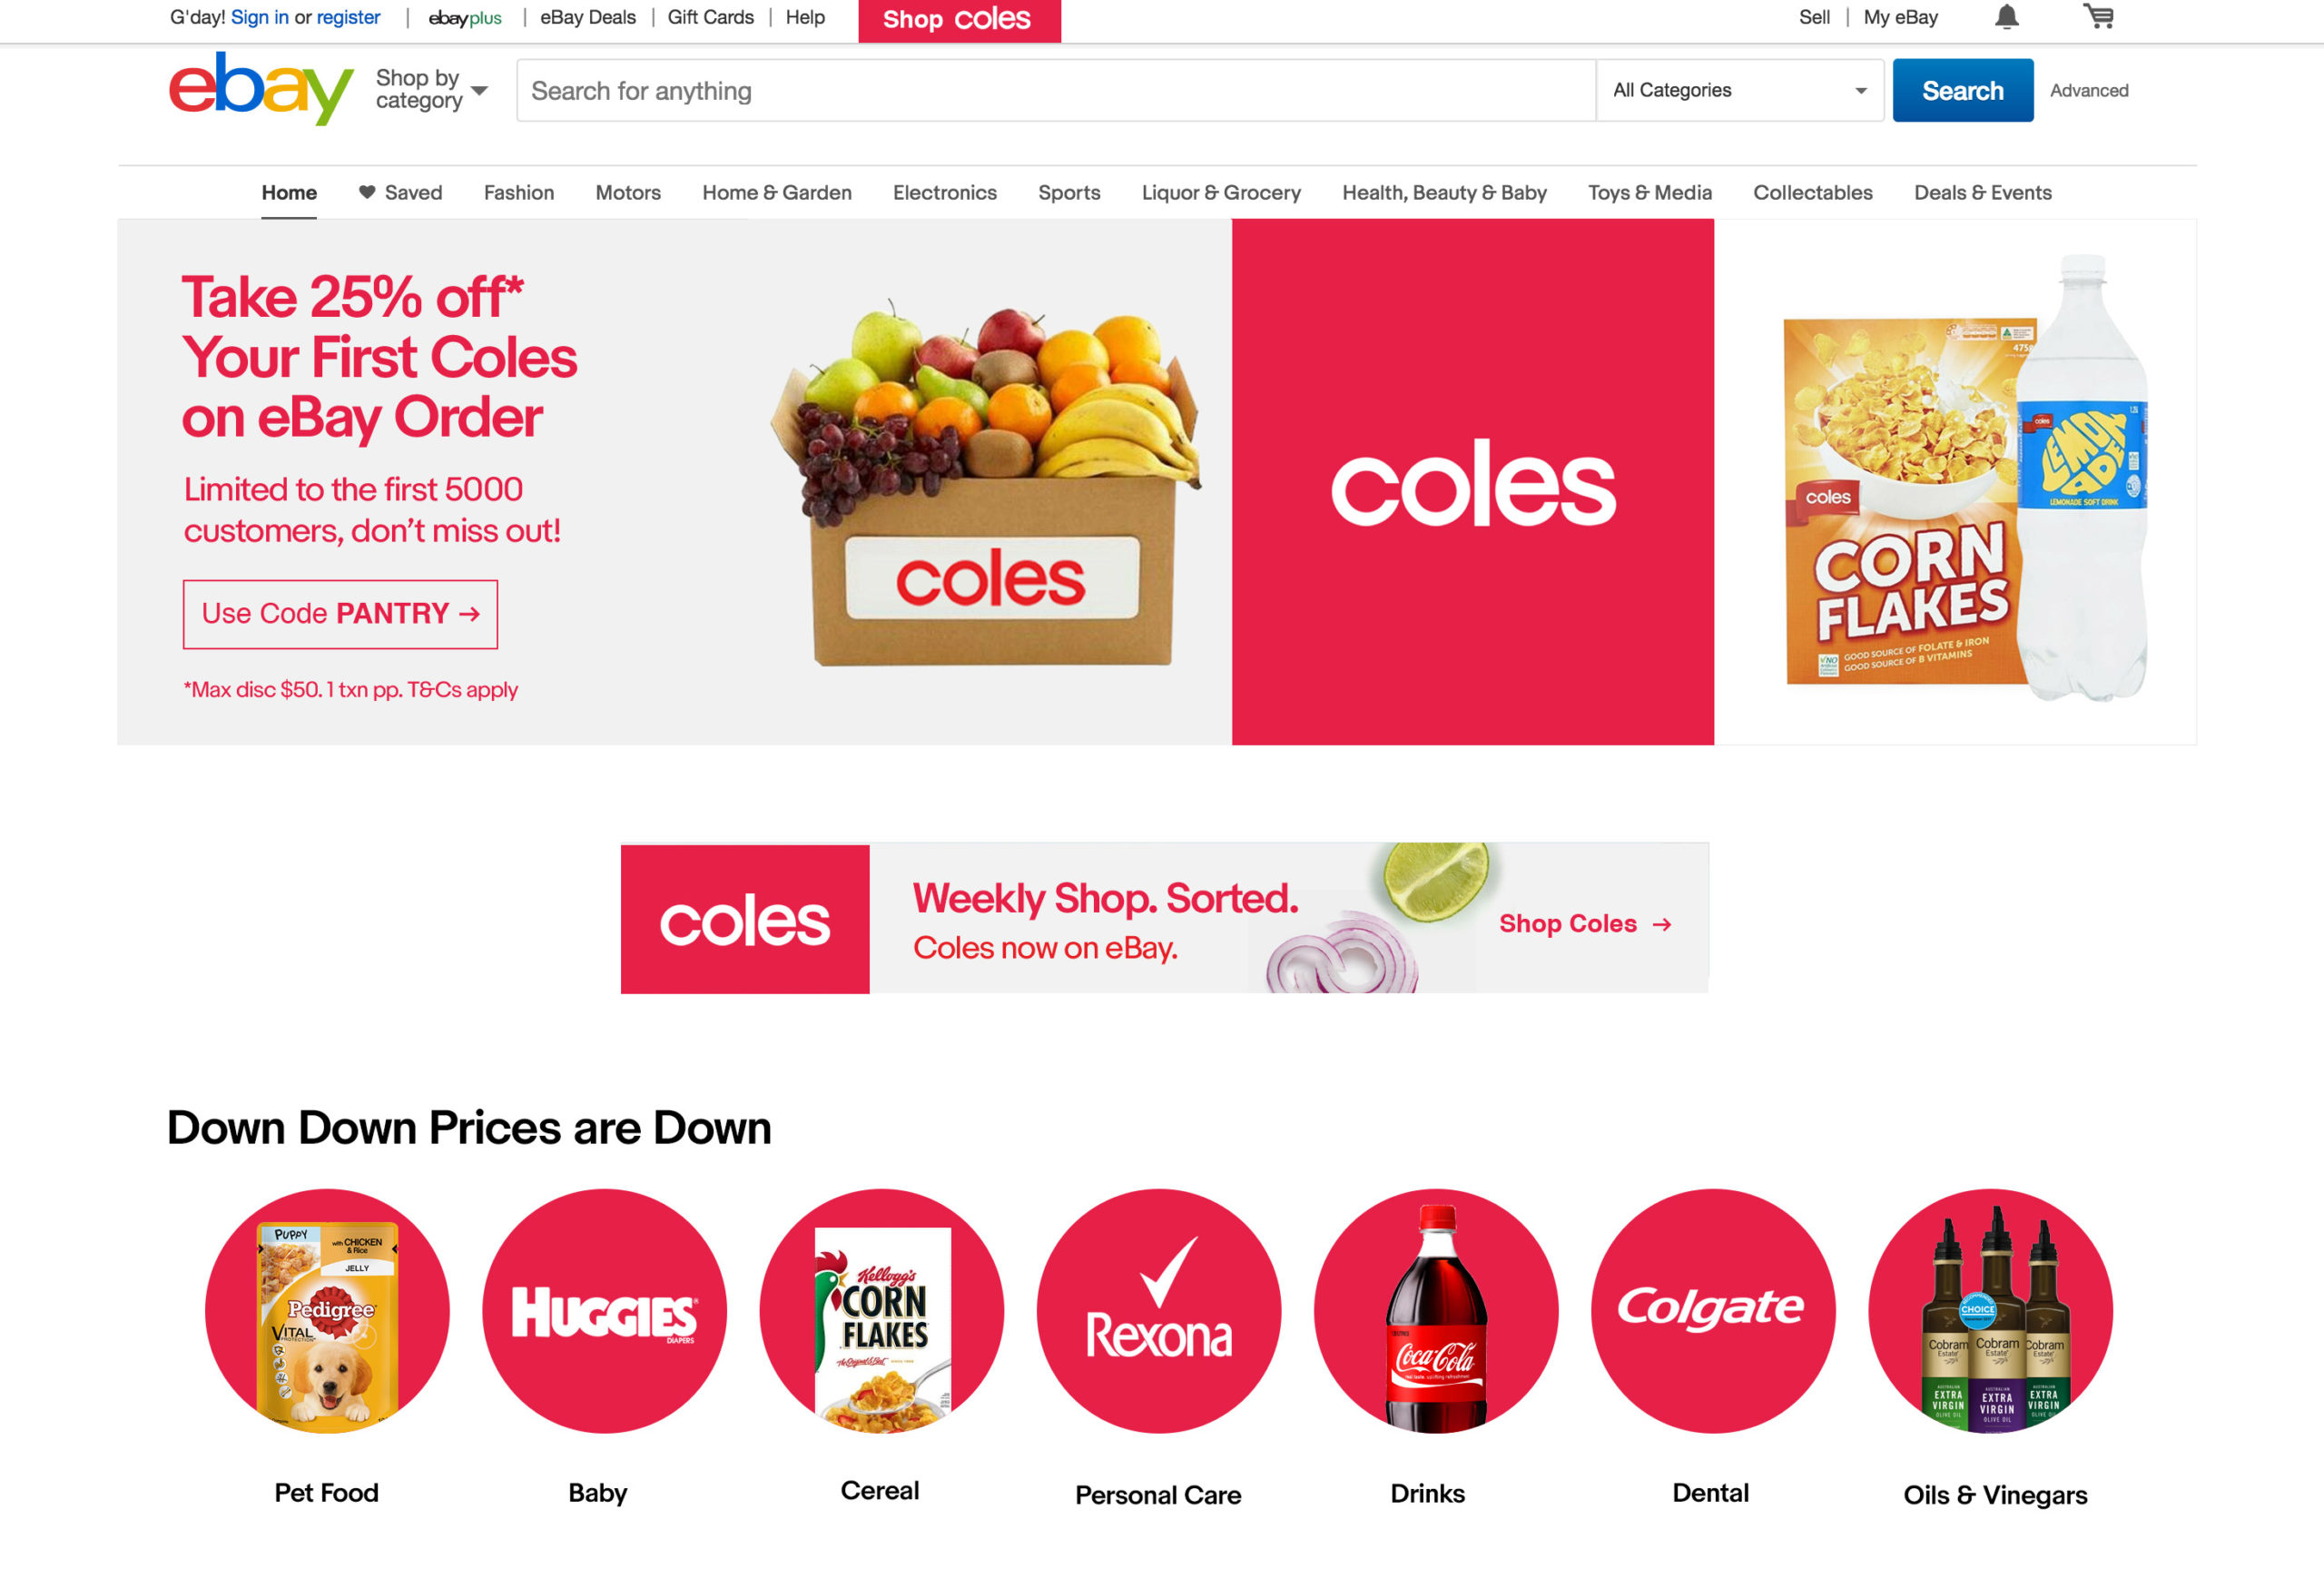 Coles catapults online grocery offering with eBay partnership Inside FMCG